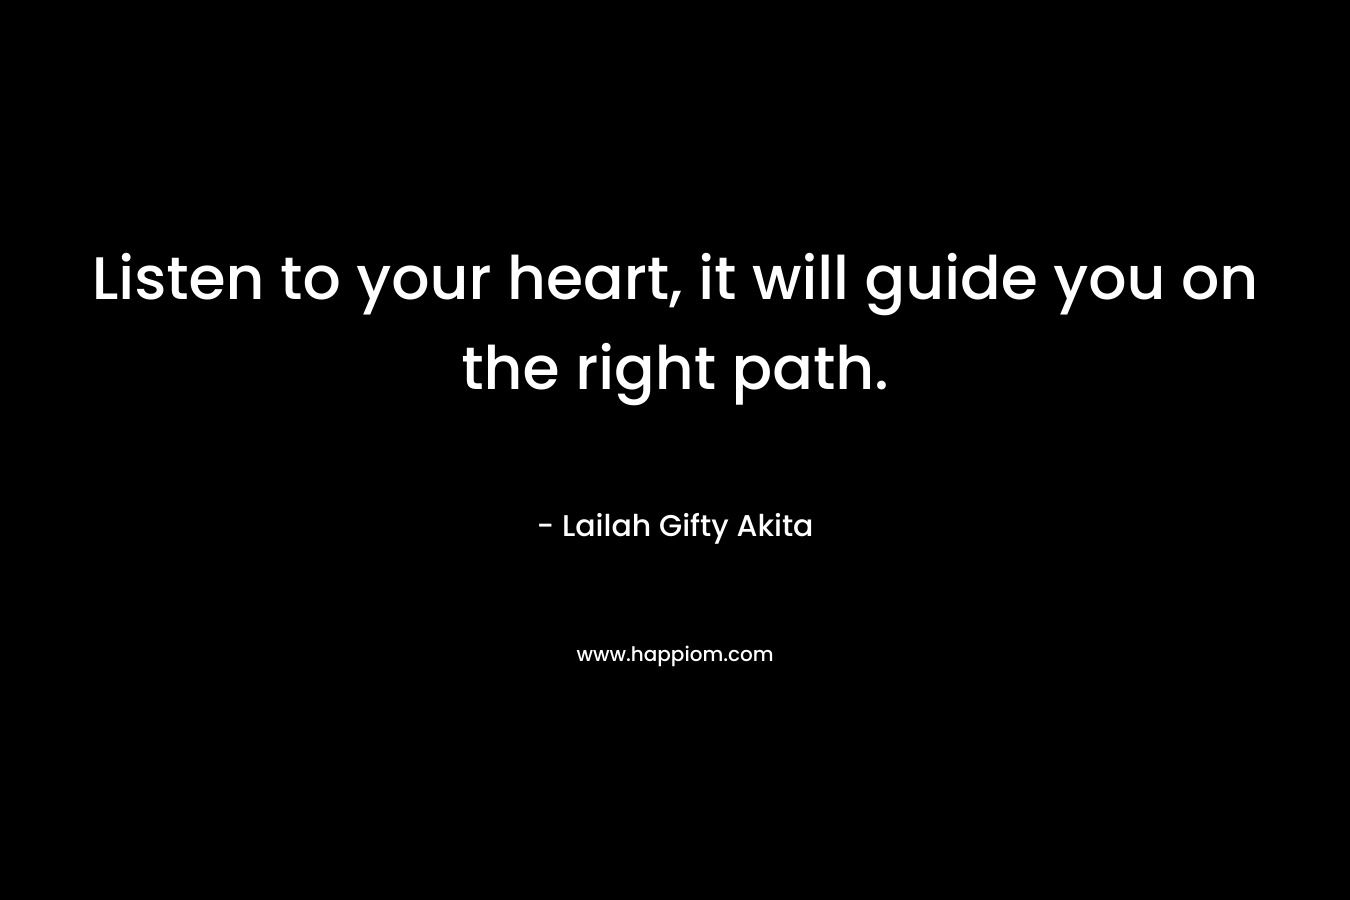 Listen to your heart, it will guide you on the right path. – Lailah Gifty Akita